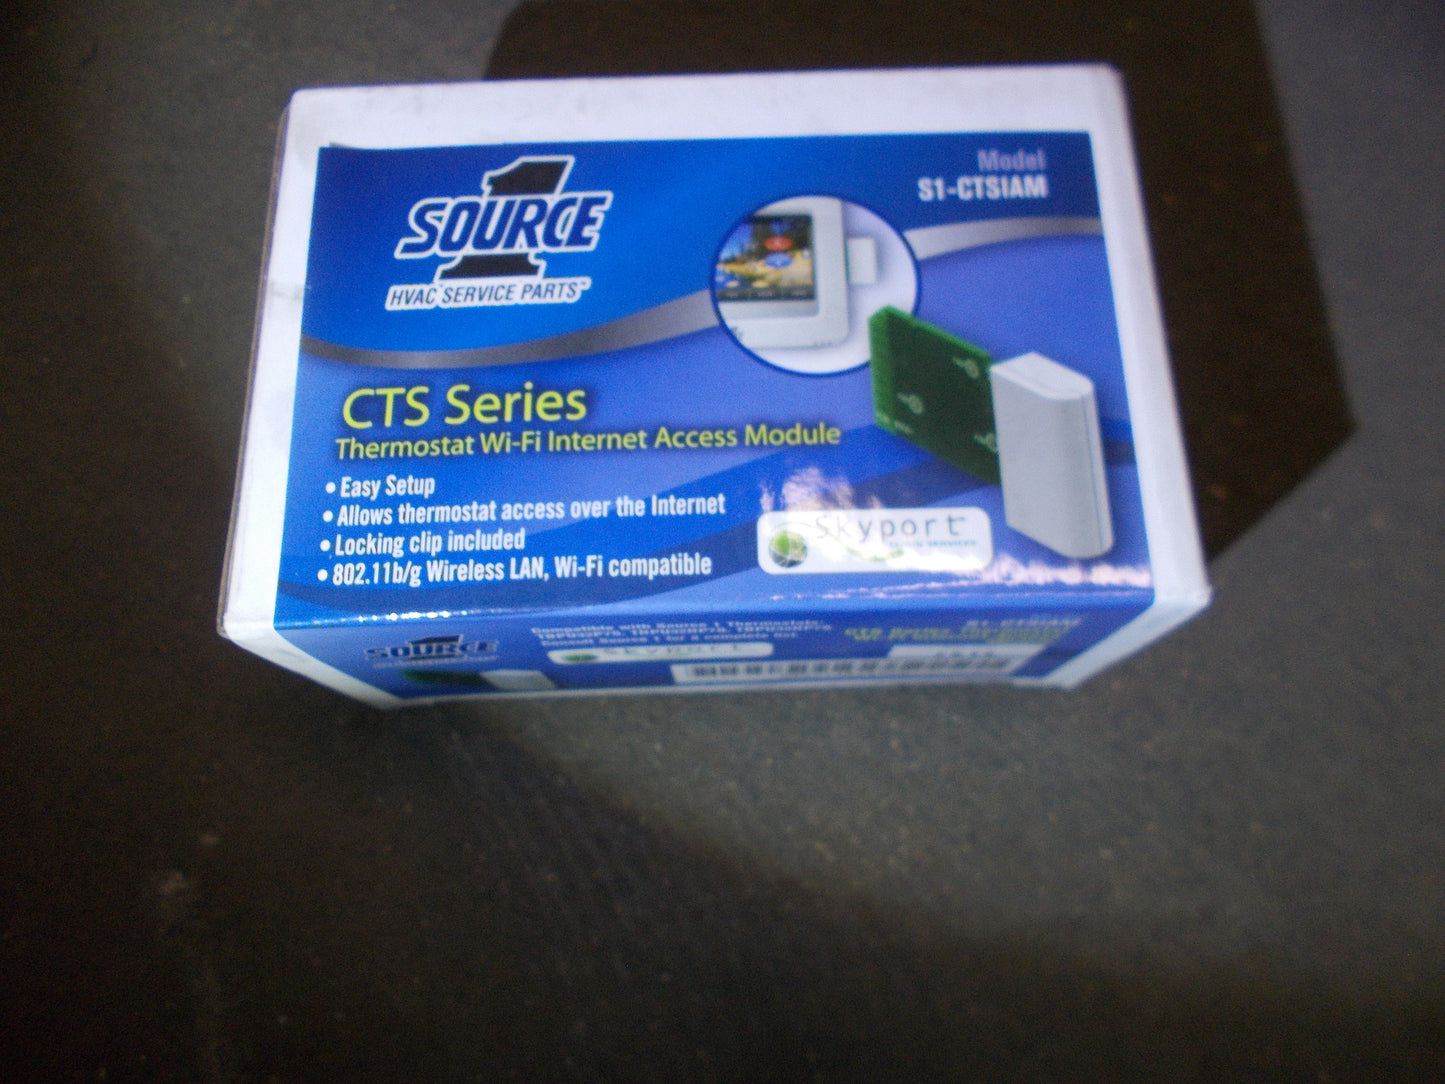 'CTS' SERIES THERMOSTAT WI-FI INTERNET ACCESS MODULE